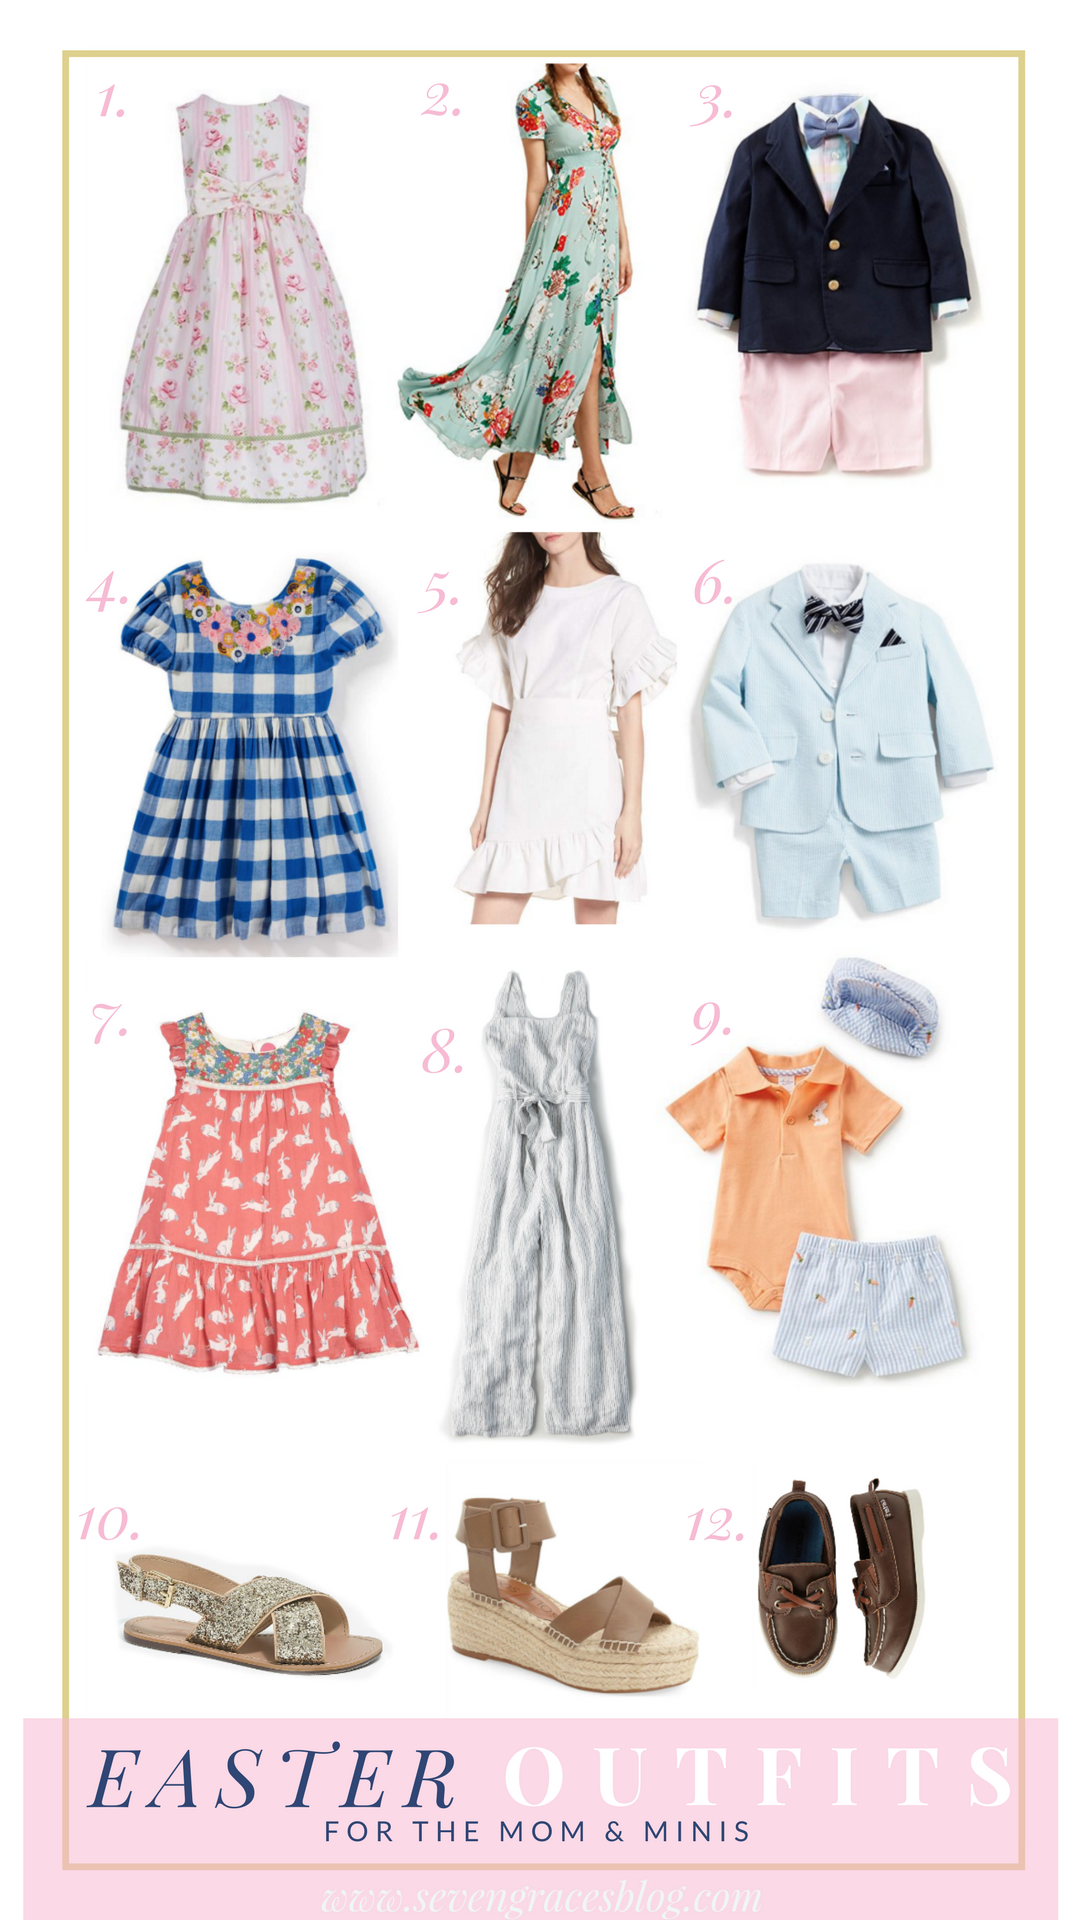 Easter Outfit Inspiration for the mom and minis! The cutest ensembles for mom, baby boy, and little girl. 